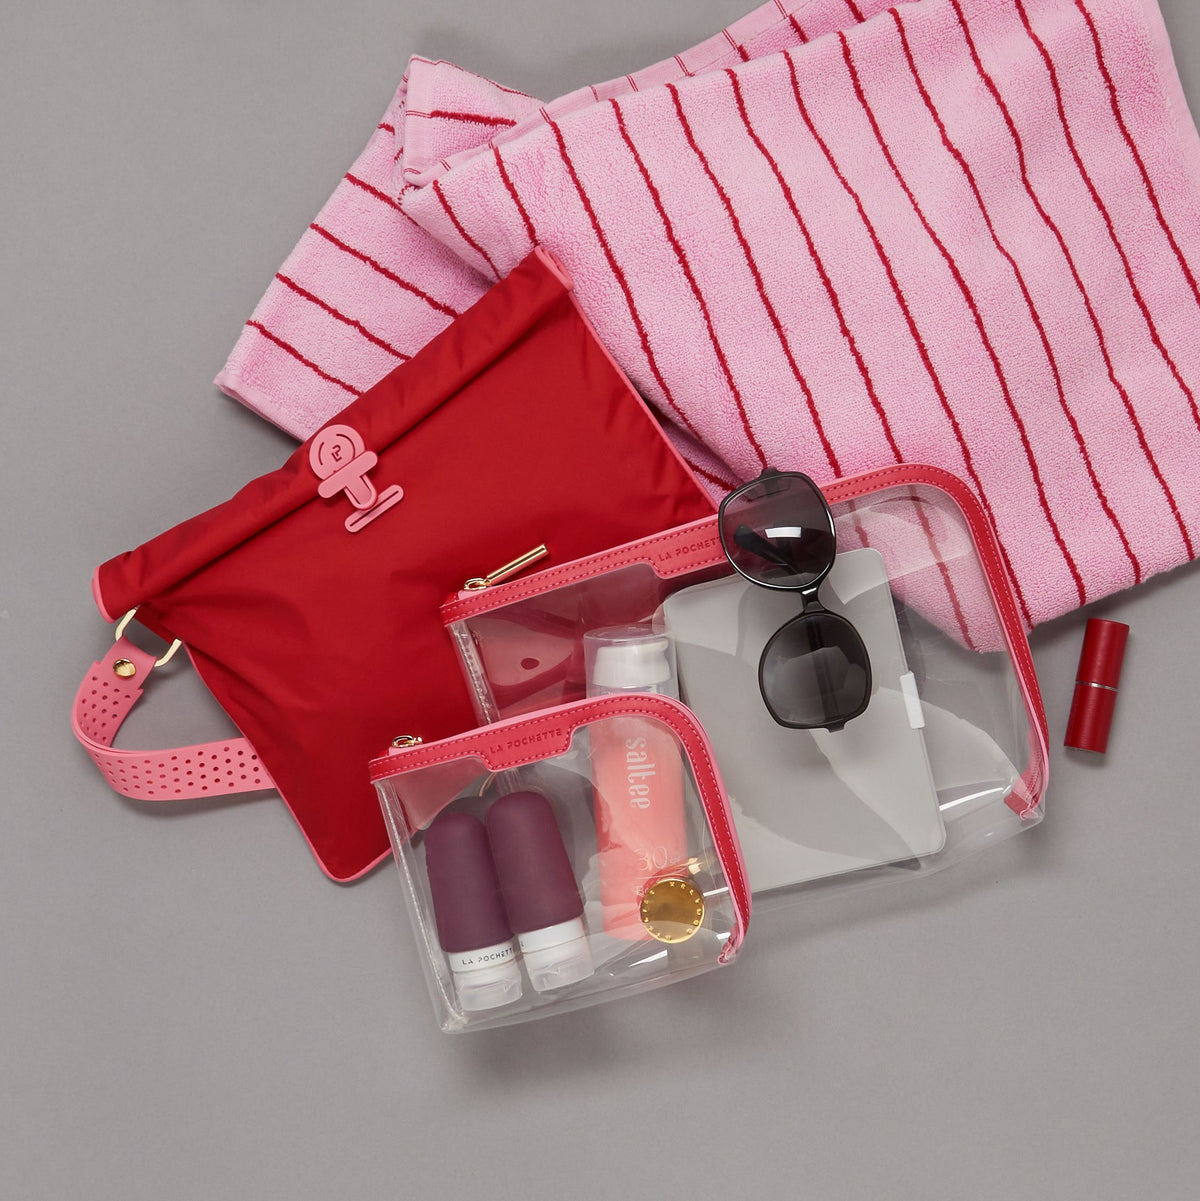 Large Wet Bag in Chilli and Peony colourway lying flat with a small Anywhere Everywhere Pouch containing La Pochette silicone travel bottles, a lipstick, and beach towel